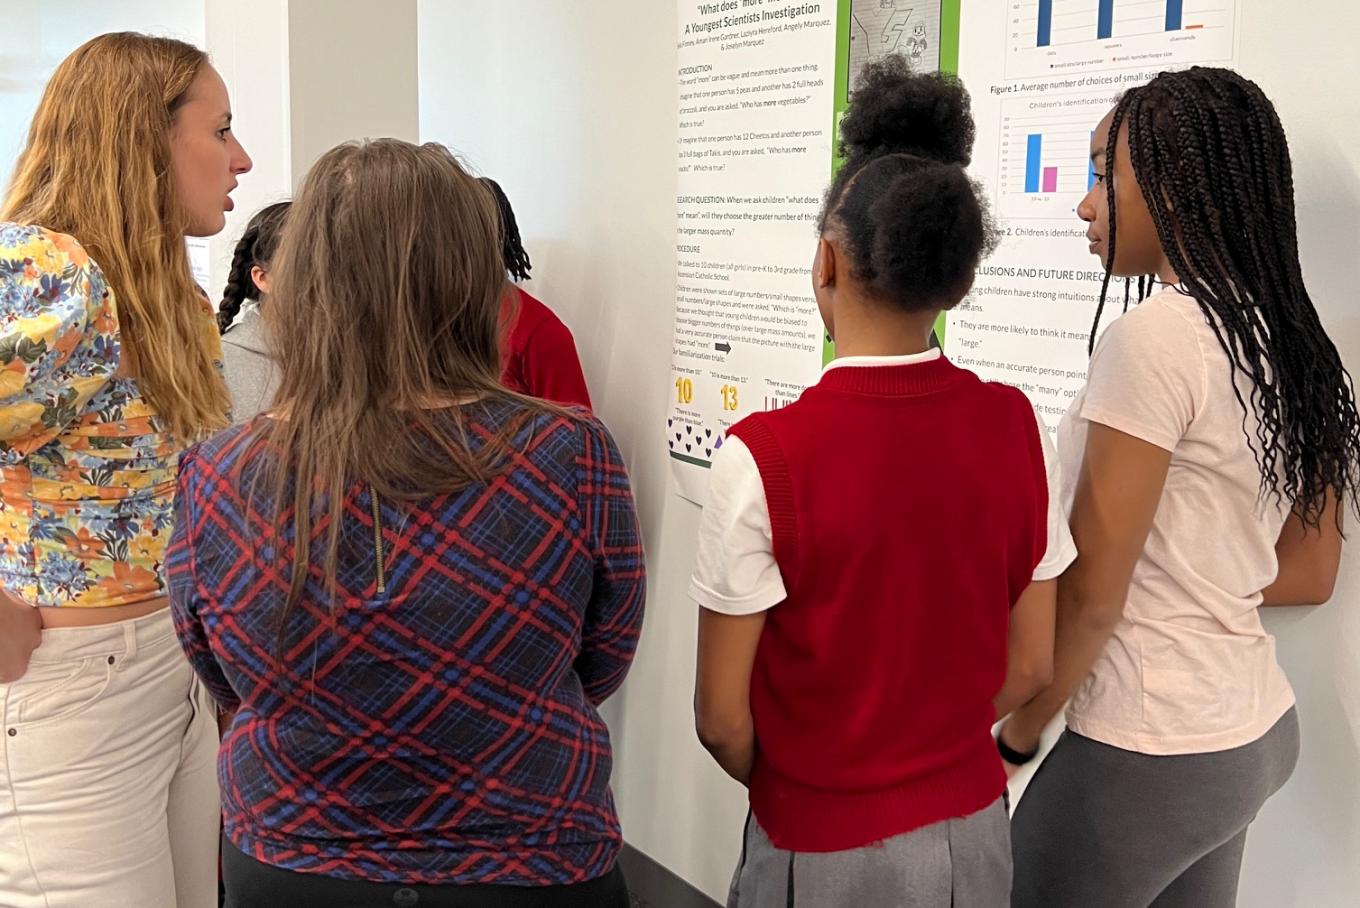 Middle school students stand in front of a research poster presenting to two graduate students